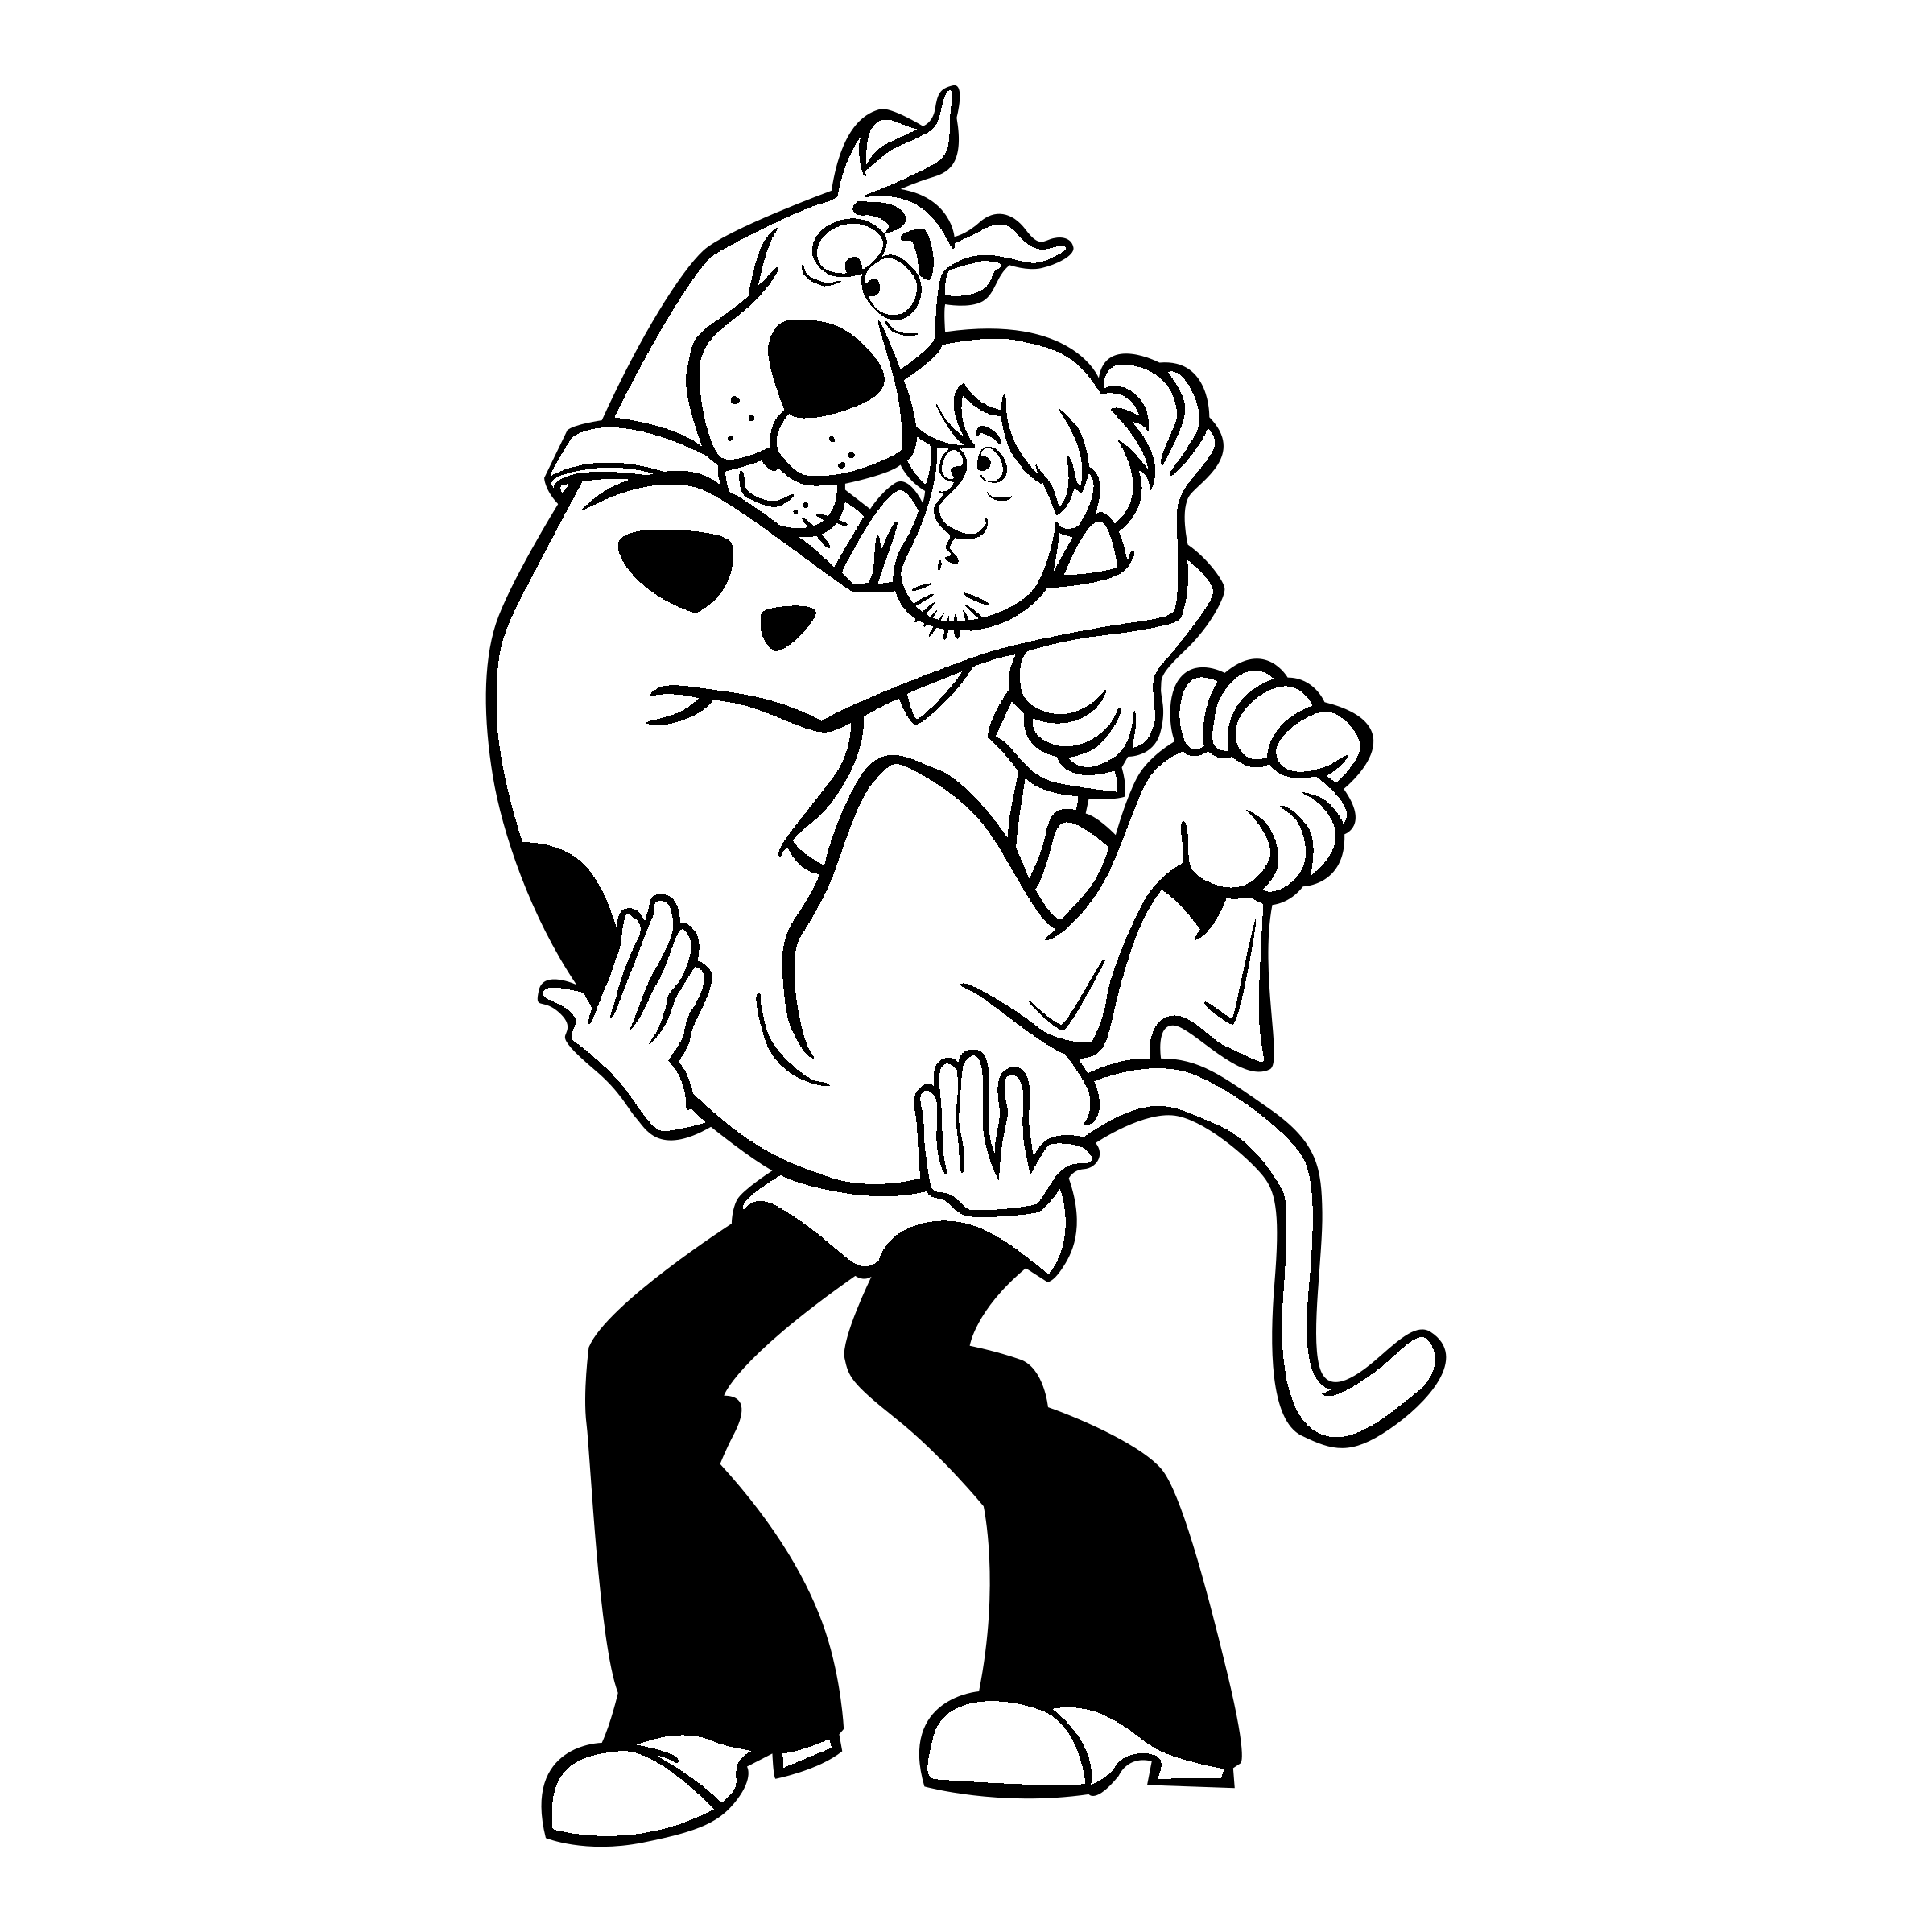 Scooby doo clipart black and white, Scooby doo black and.